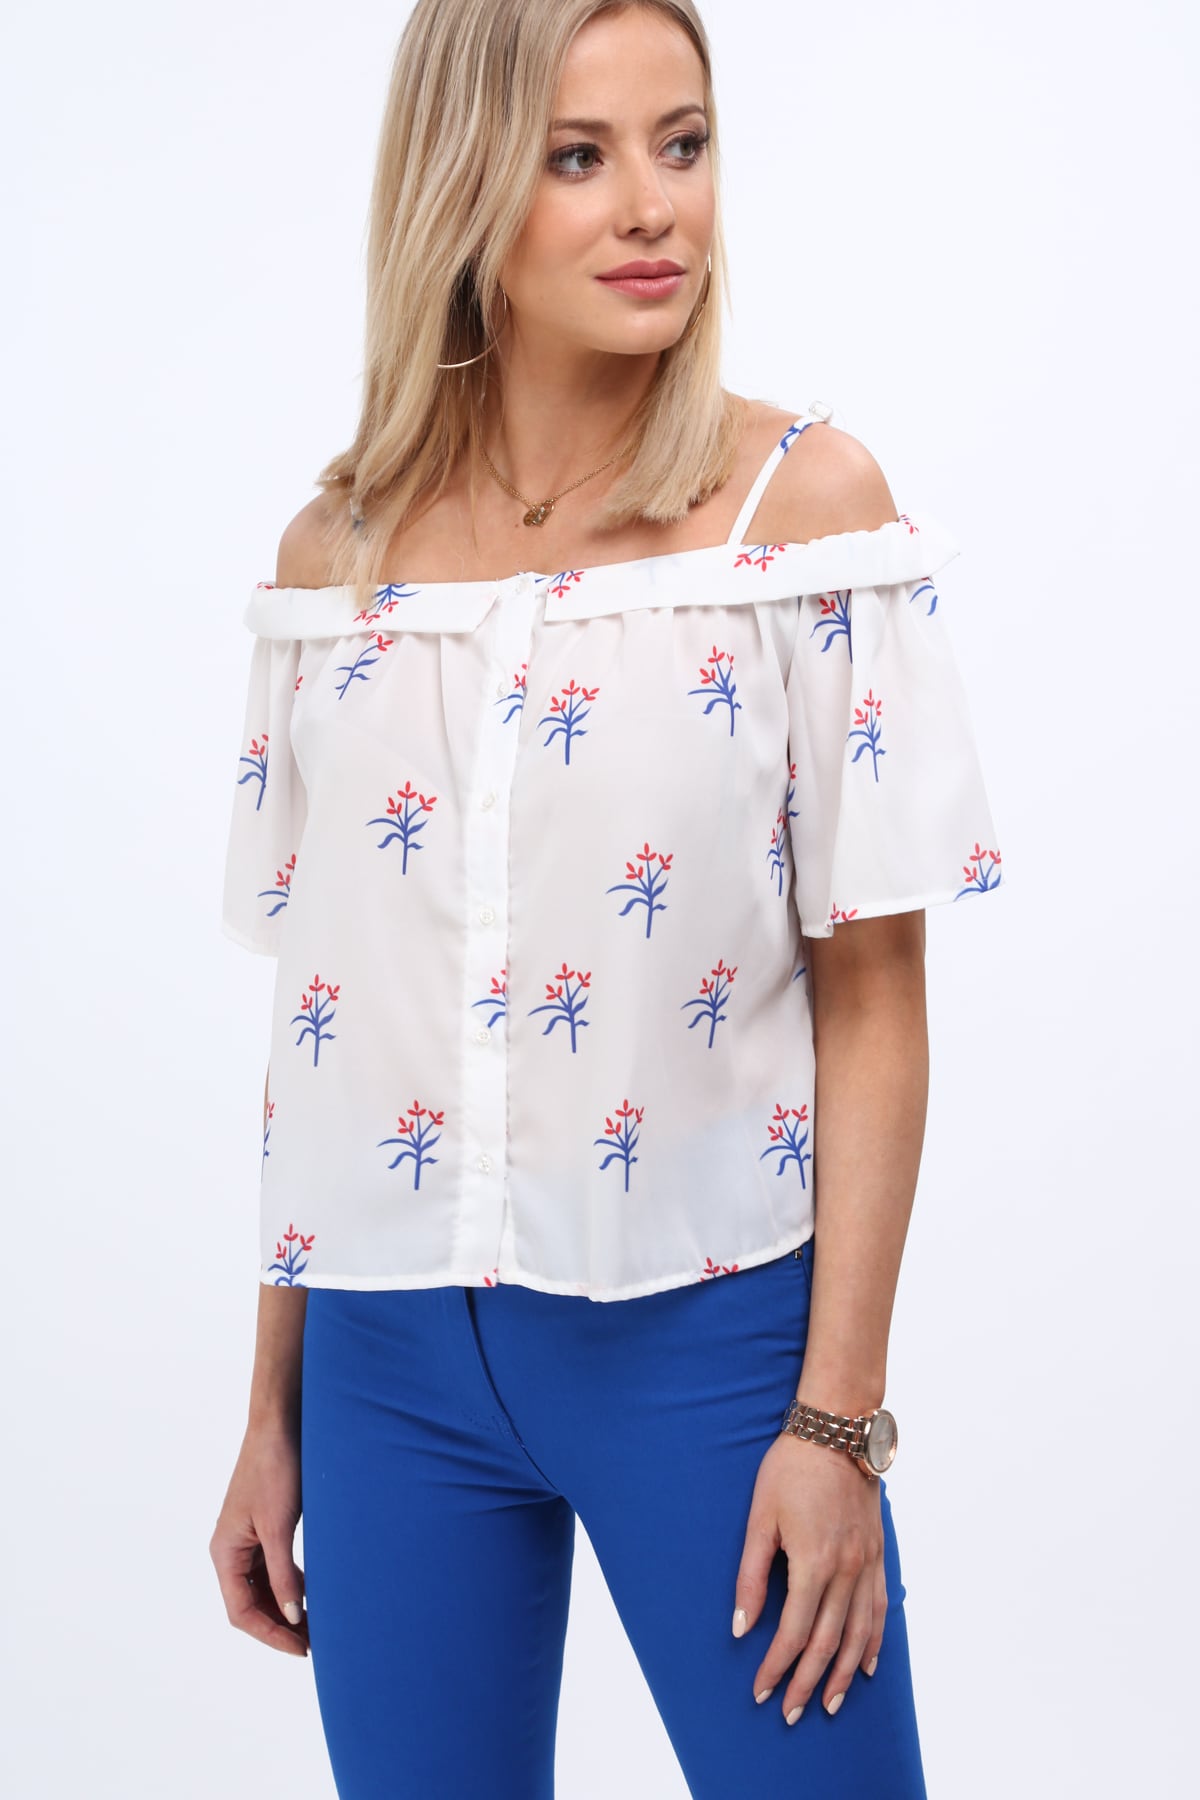 Cream blouse with exposed shoulders